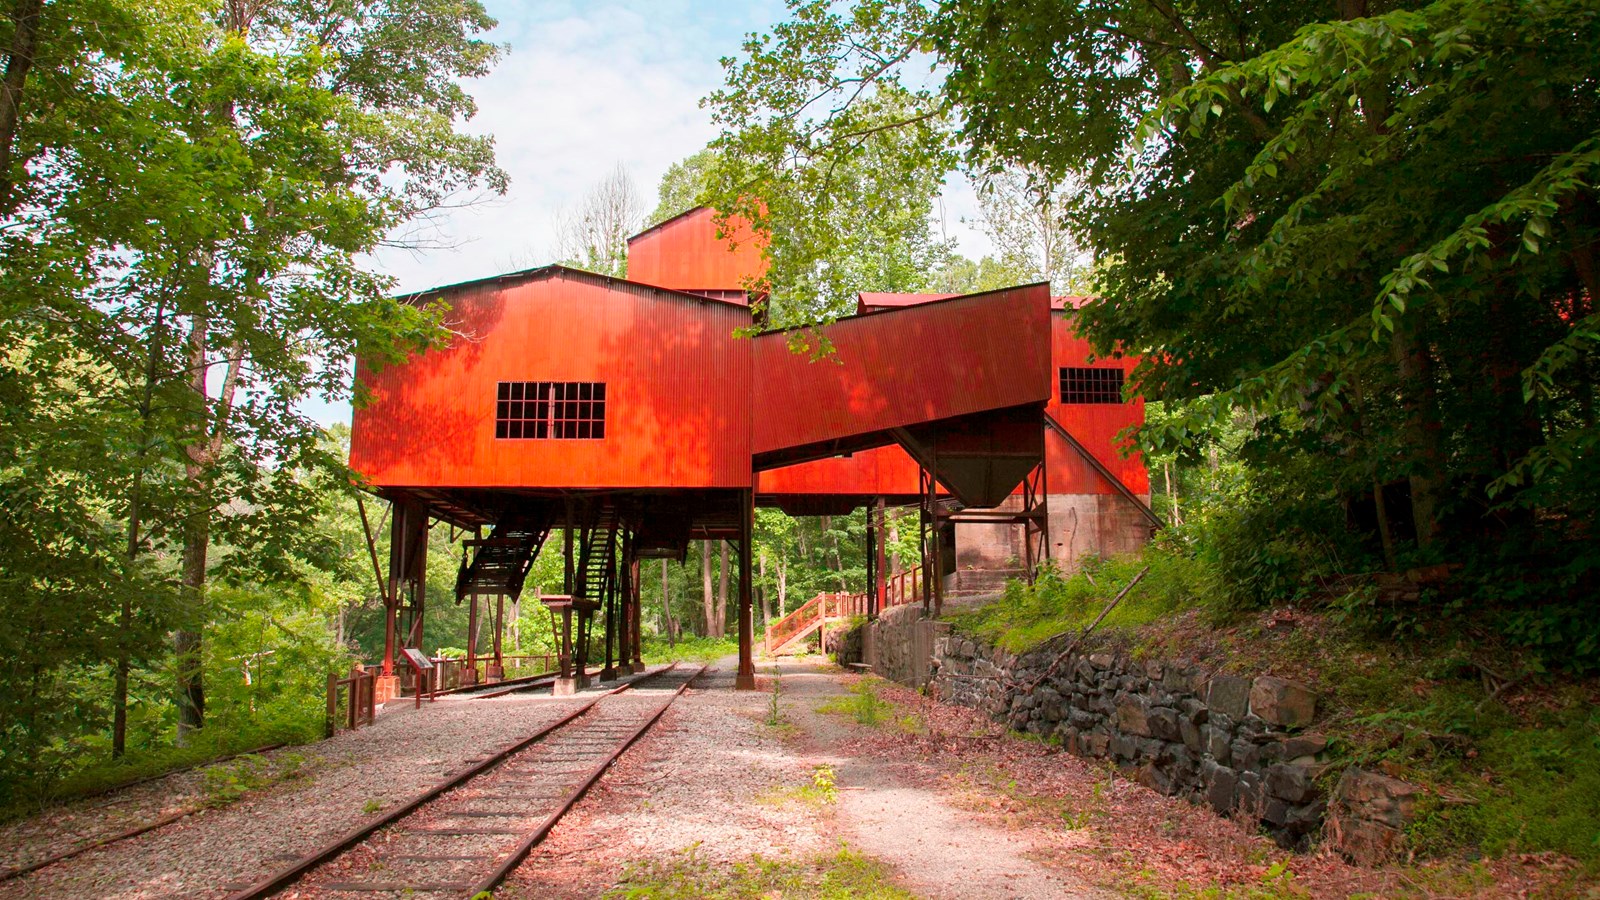 A red coal tipple standing over old railroad tracks